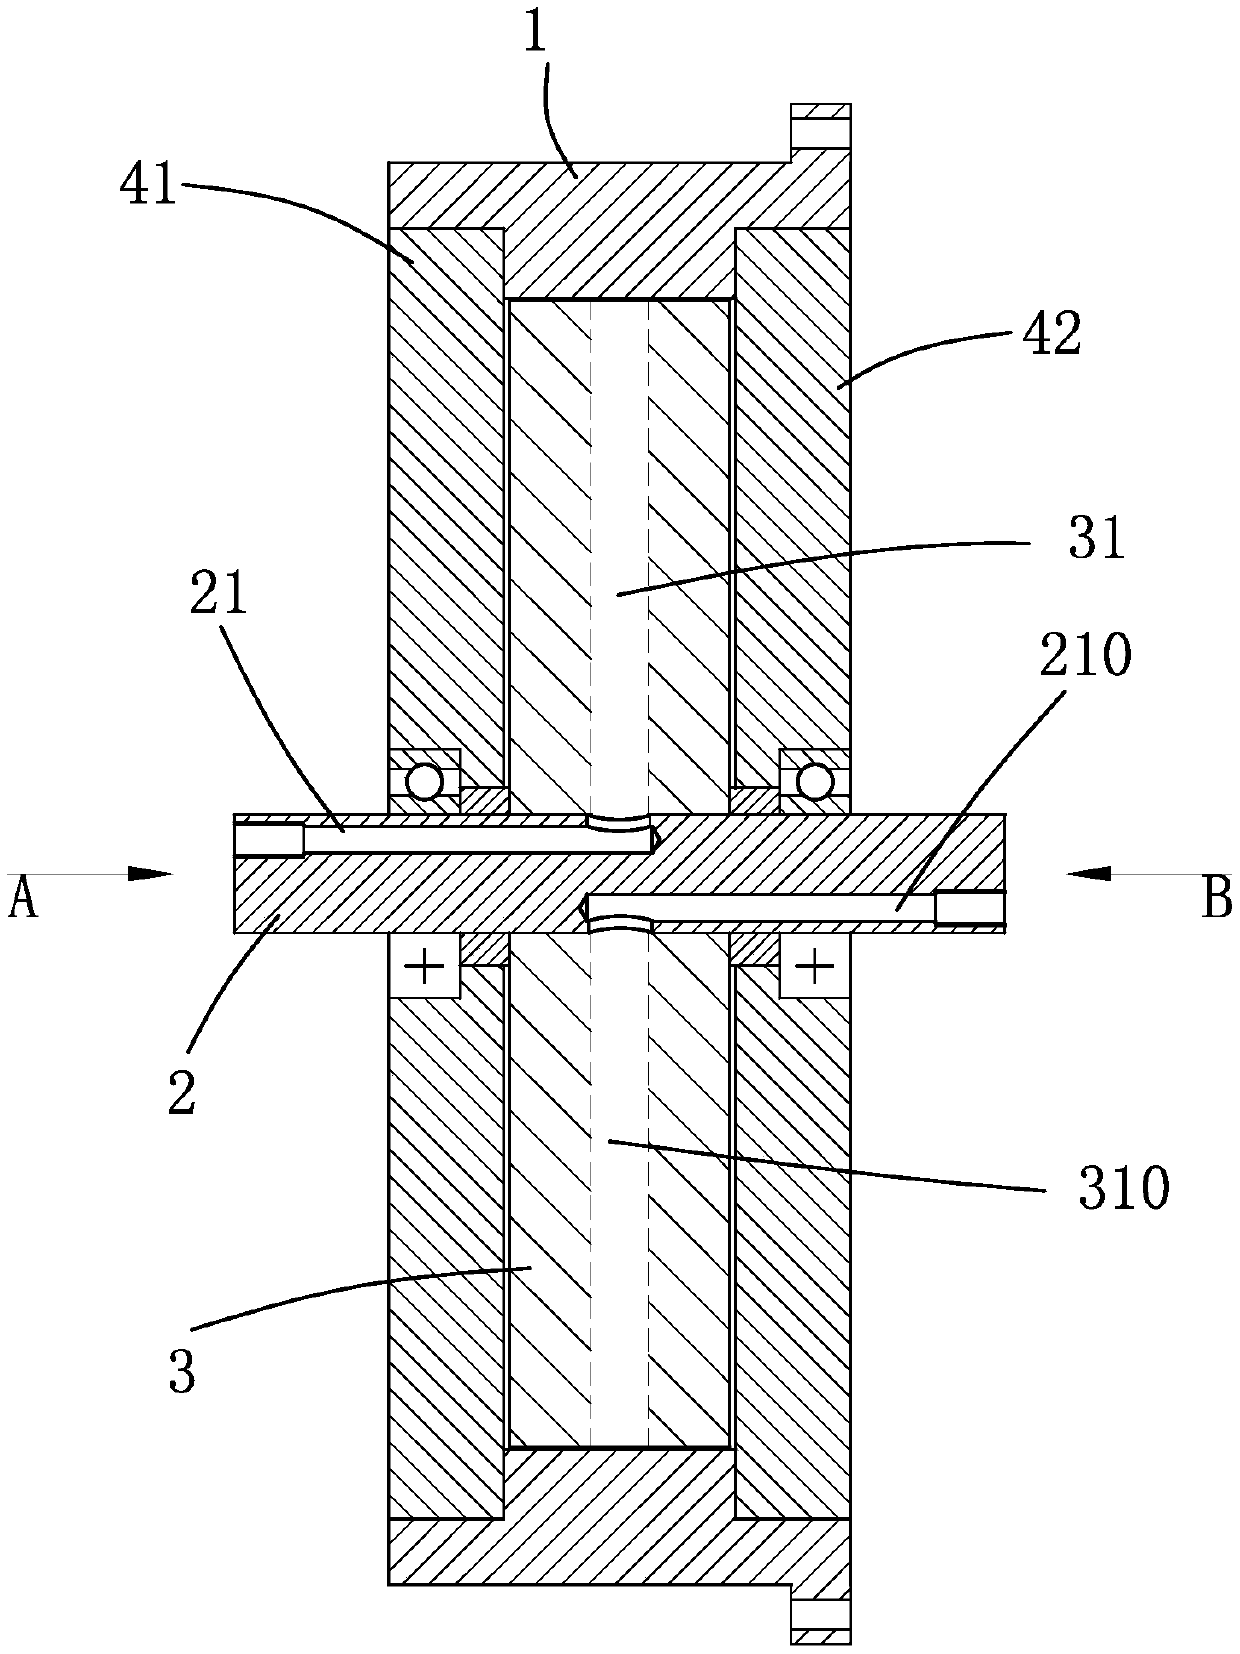 Fluid-driven tunneling device